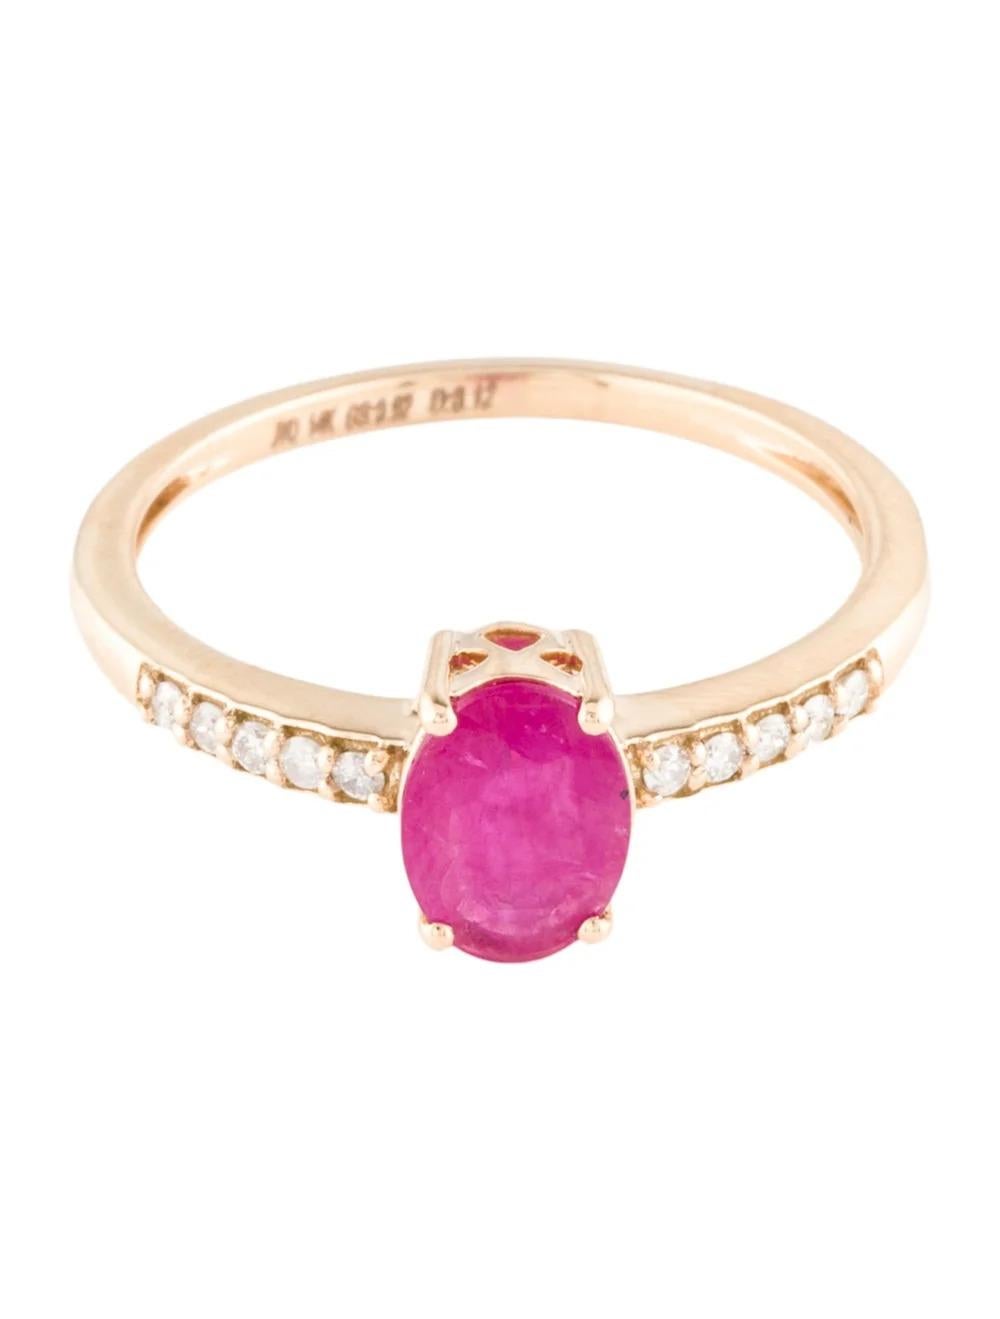 Oval Cut 14K Ruby & Diamond Cocktail Ring - Size 8.75 - Timeless Elegance, Luxury Jewelry For Sale